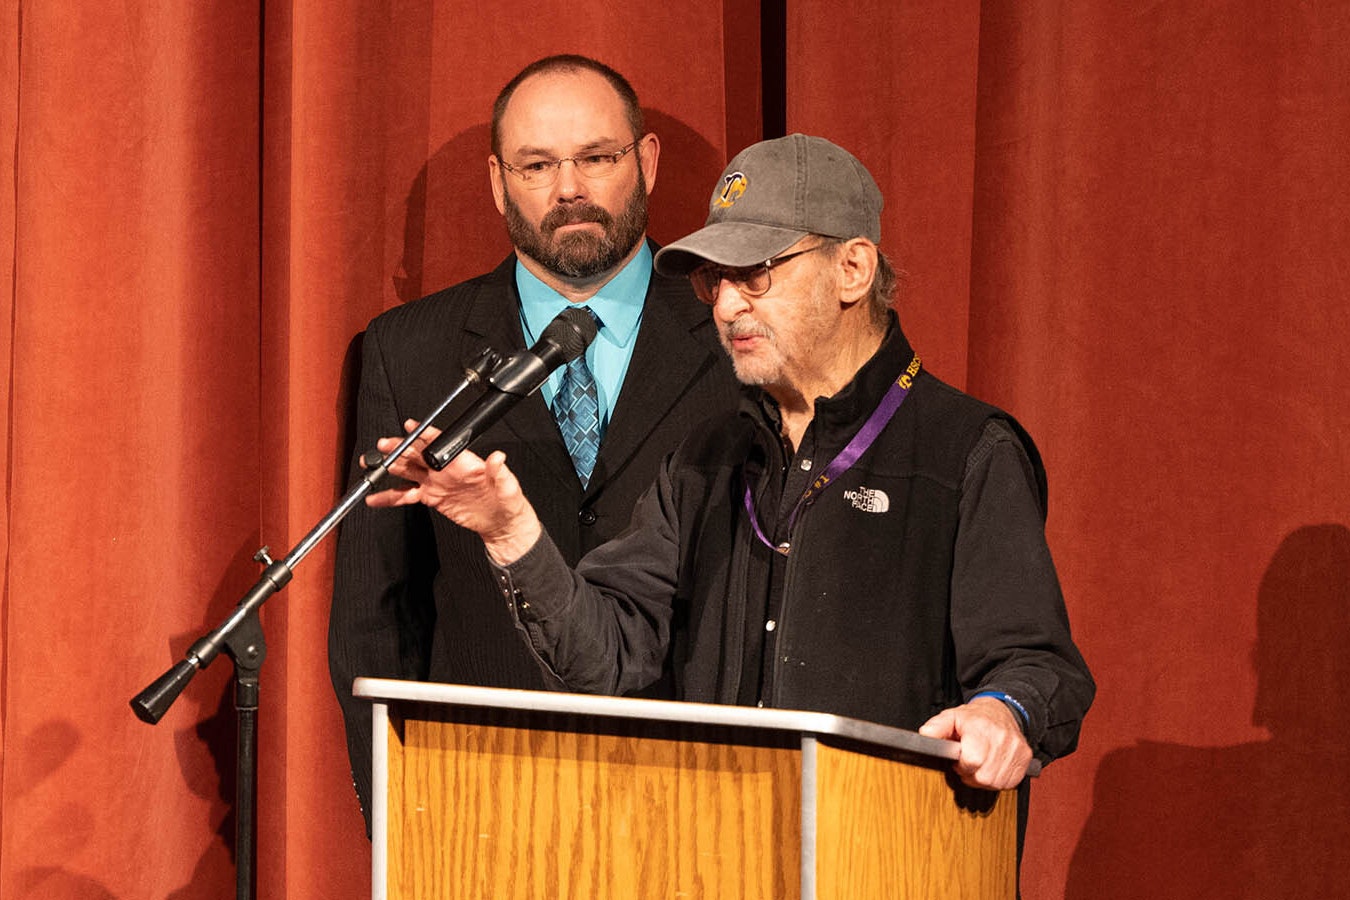 Joe Arnold, the longtime custodian for the Hot Springs School District 1 administration building, was surprised by an assembly in his honor Wednesday. He's pictured here with Superintendent Dustin Hunt, behind.